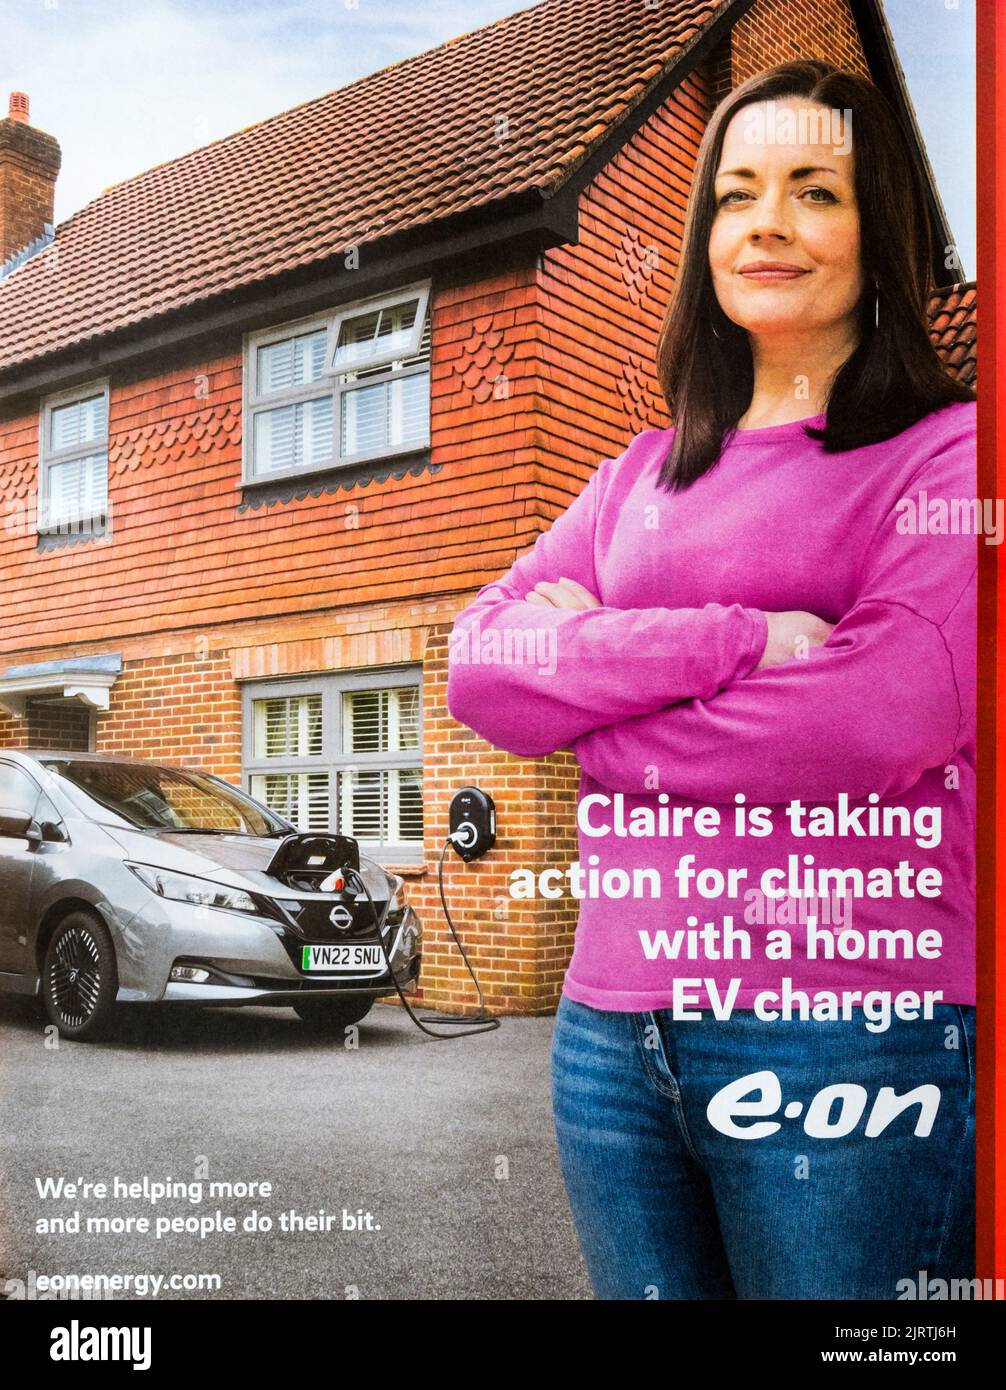 Advert for energy company Eon or E.On promoting use of a home EV charger. Stock Photo